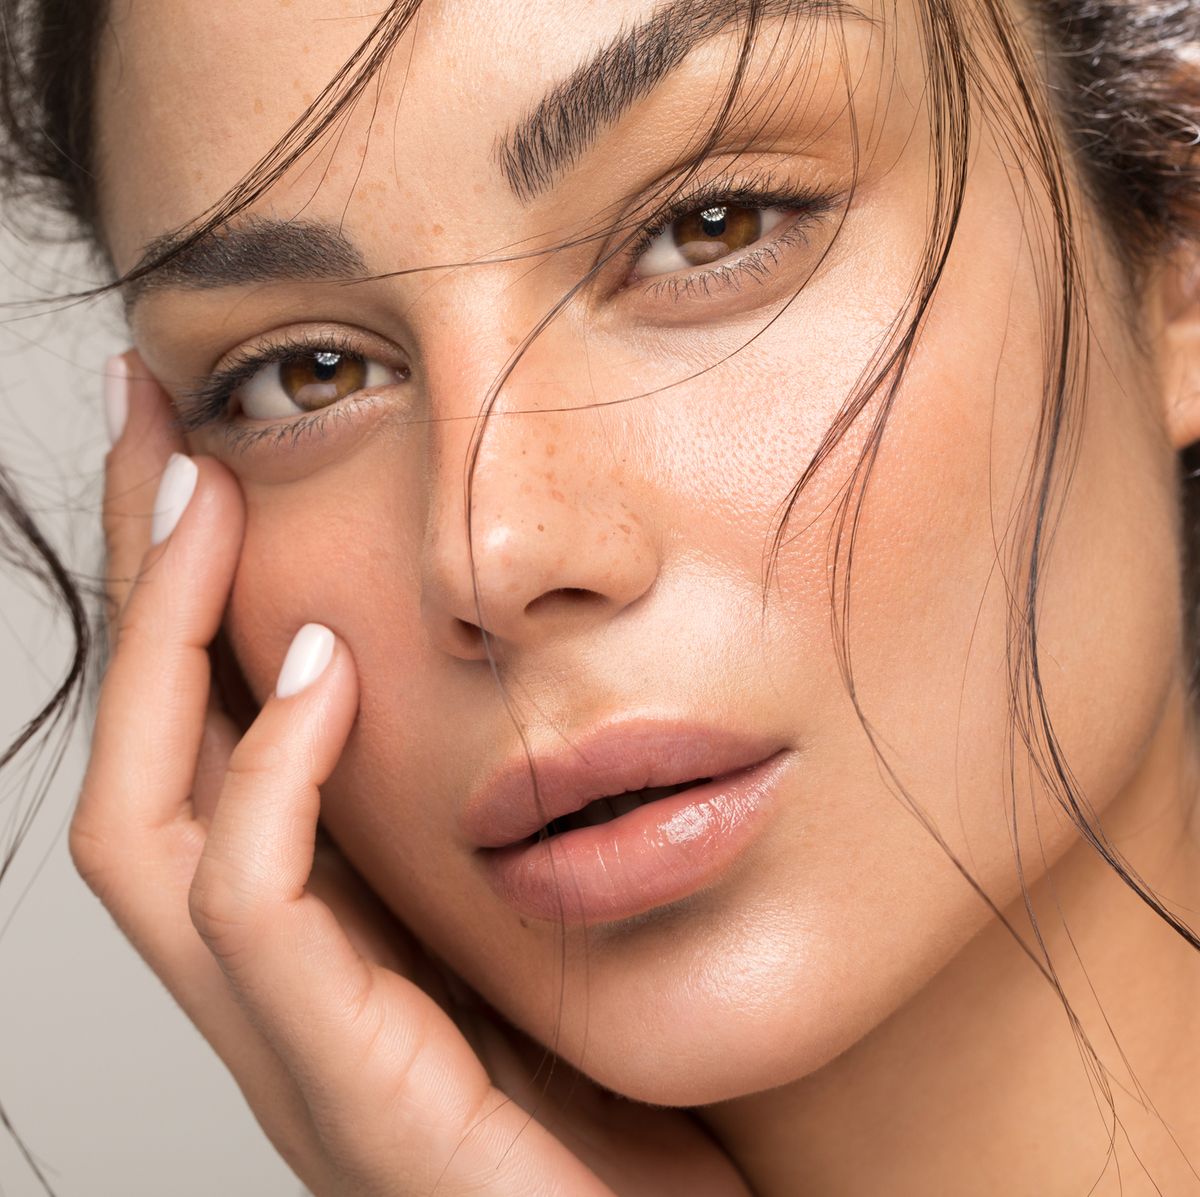 5 Skincare to Look Pretty and Makeup